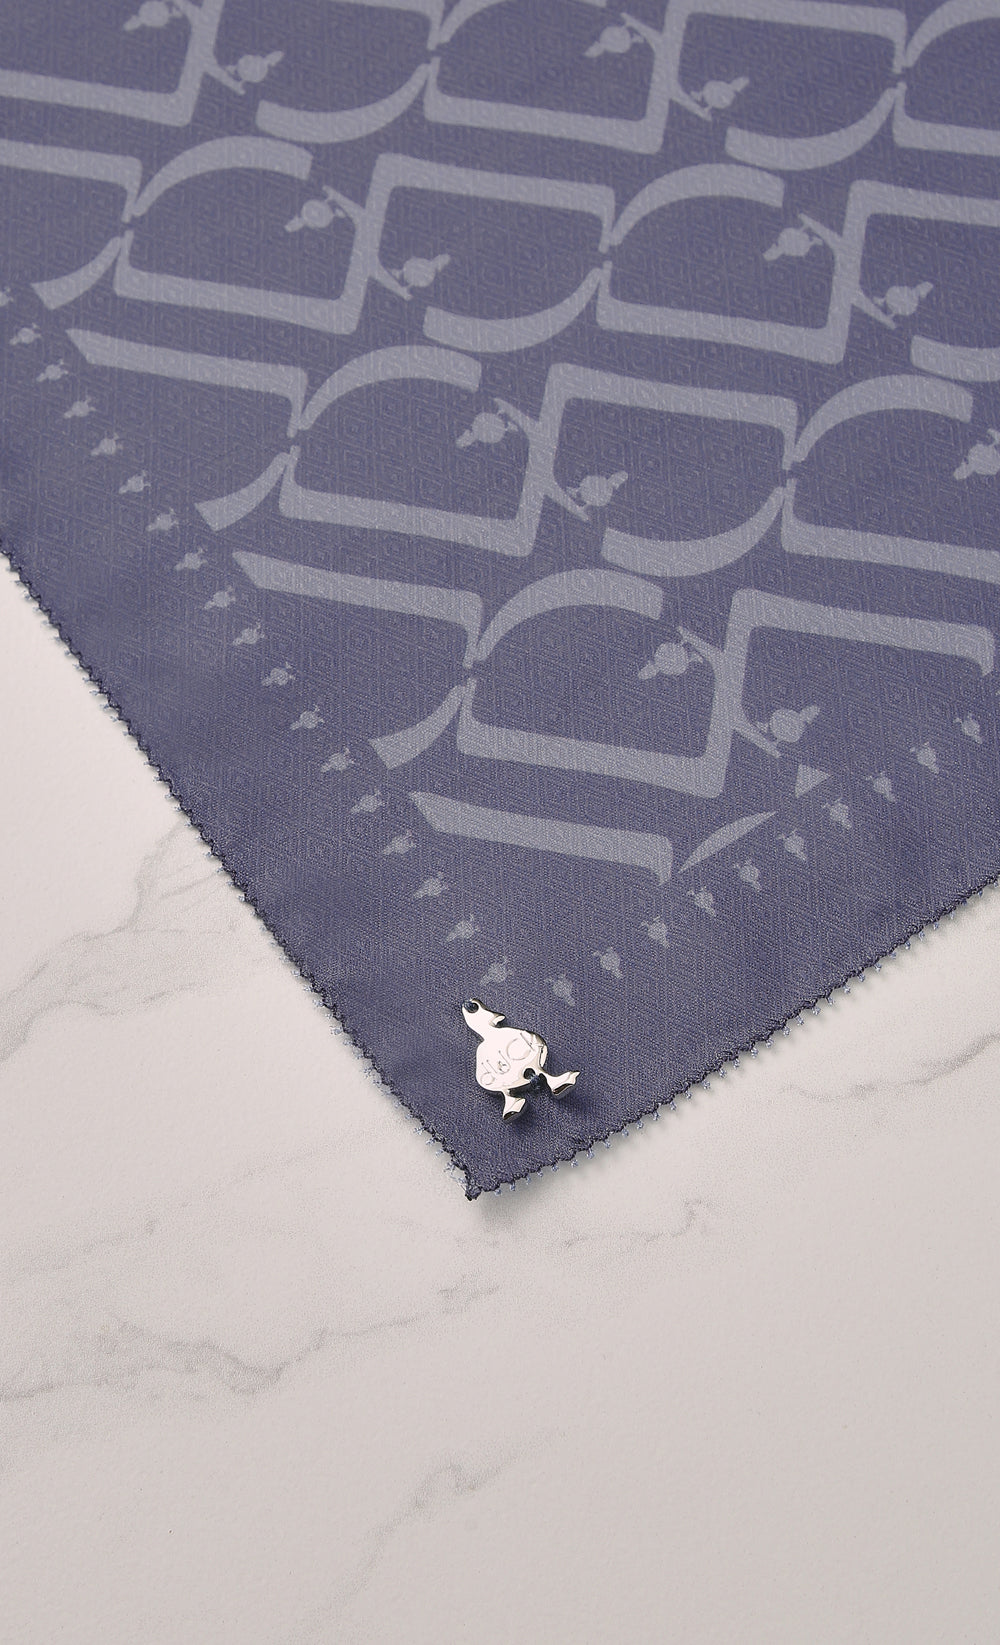 D Monogram dUCk Voile Shawl in Berry Blue